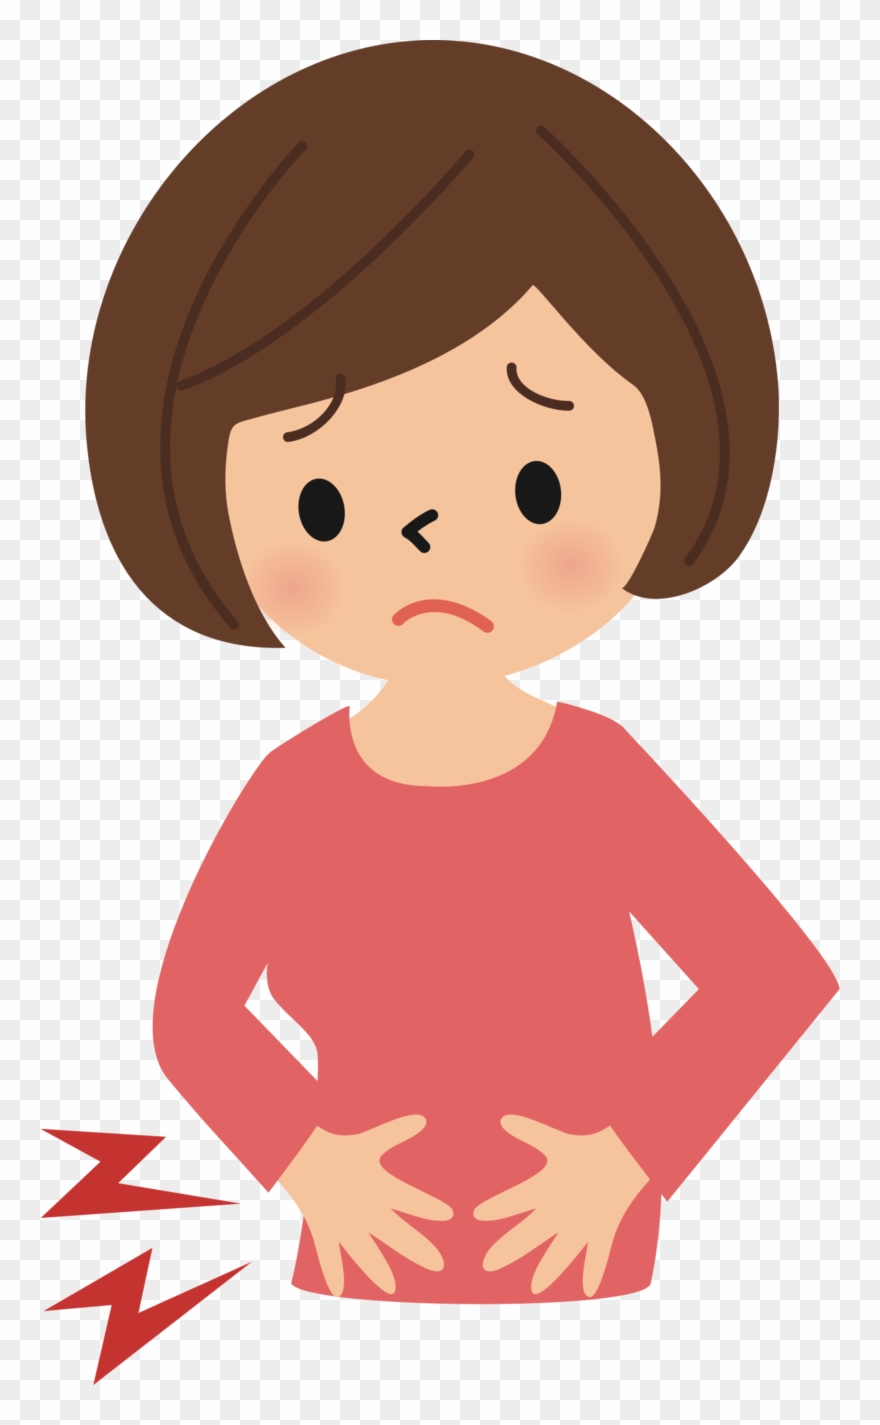 Pain in free photo. Stomach clipart stomach hurts